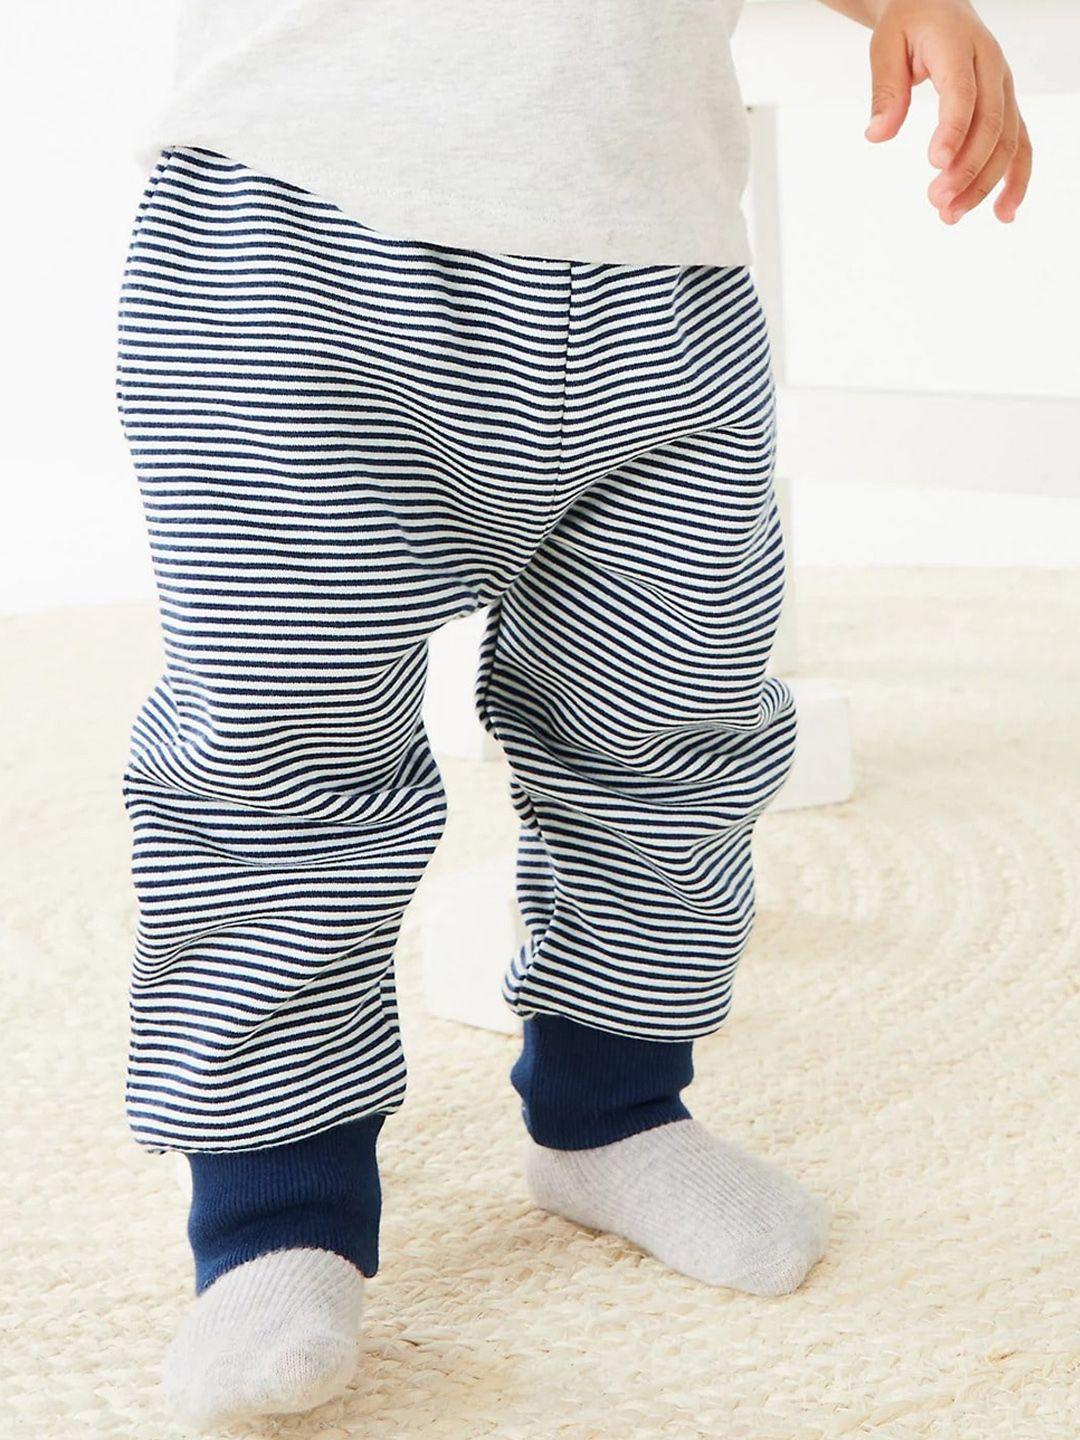 marks & spencer boys striped cotton joggers